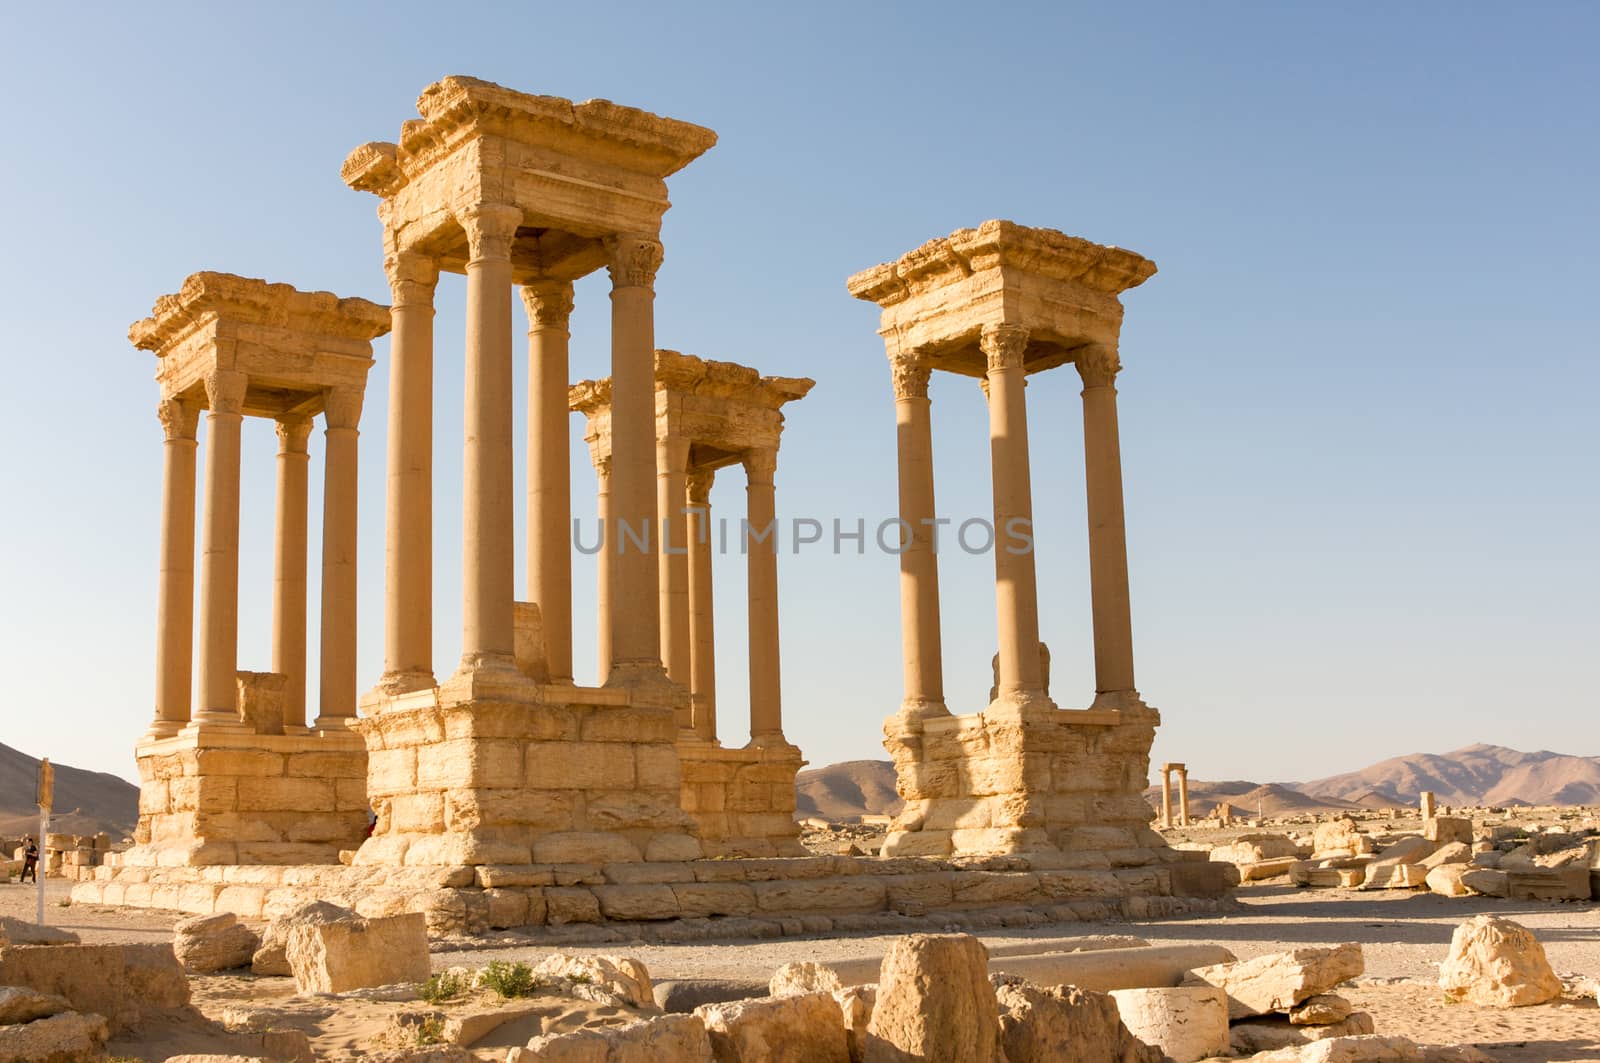 Palmyre Syria 2009 The ruins of an ancient city dating from the Roman period by kgboxford